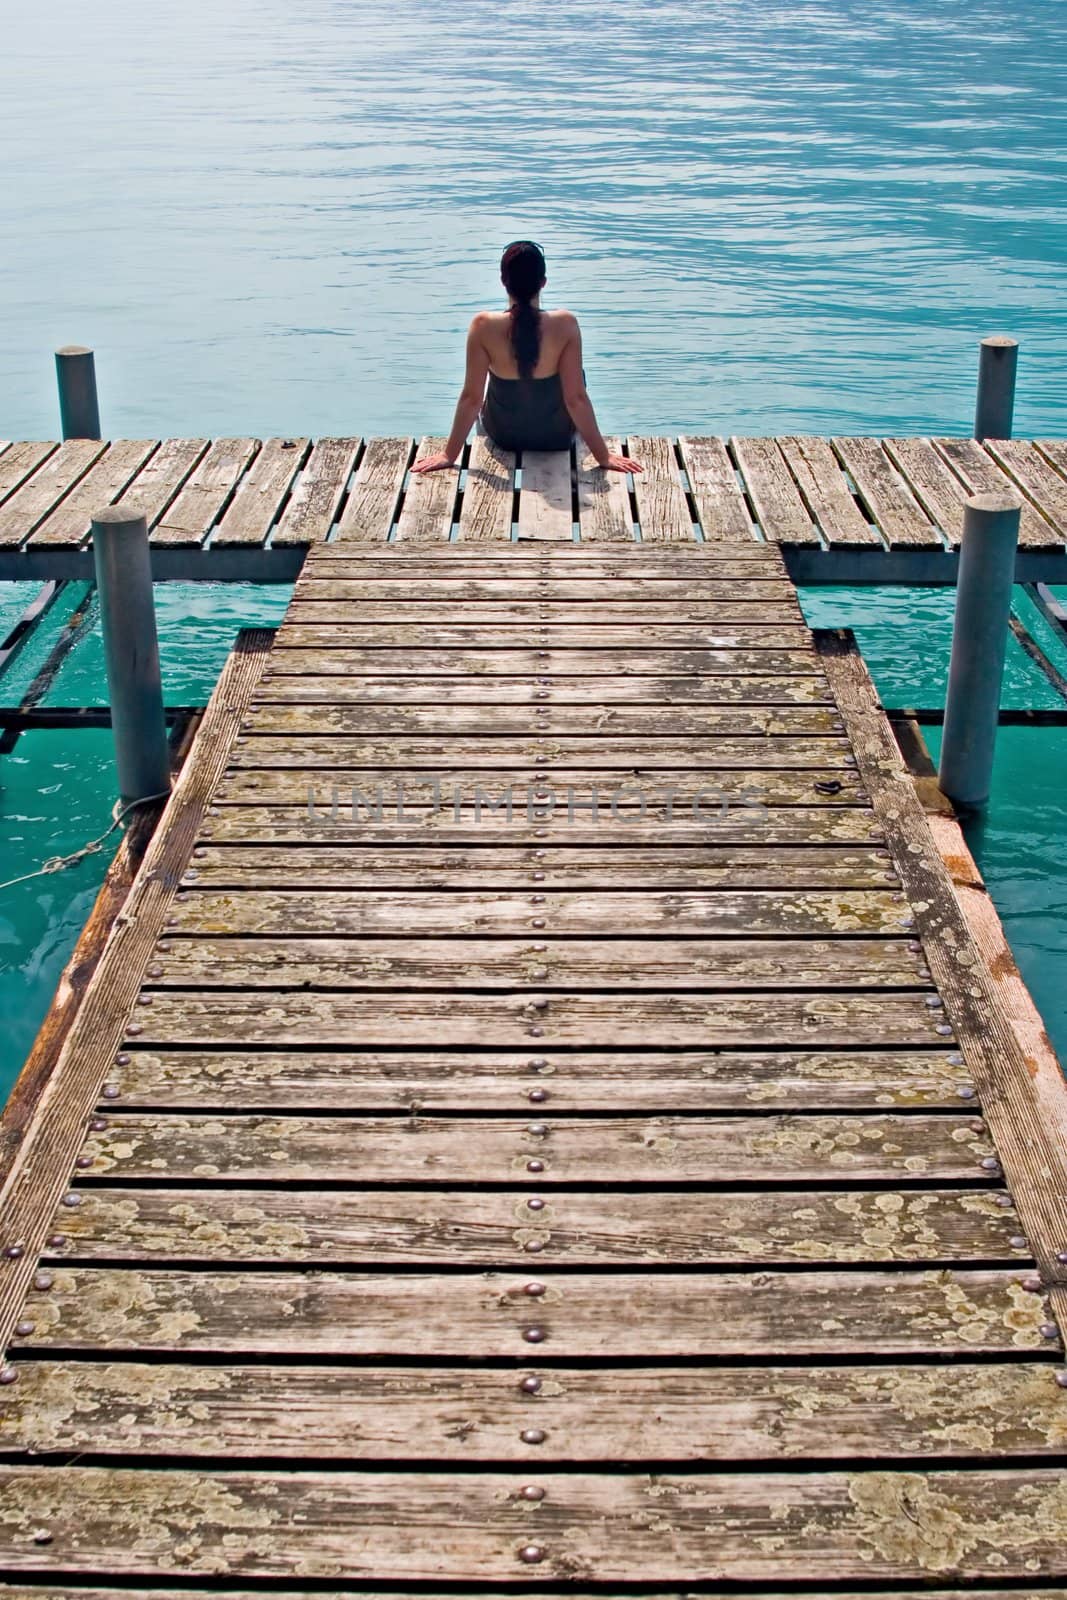 Woman contemplating in wooden dock